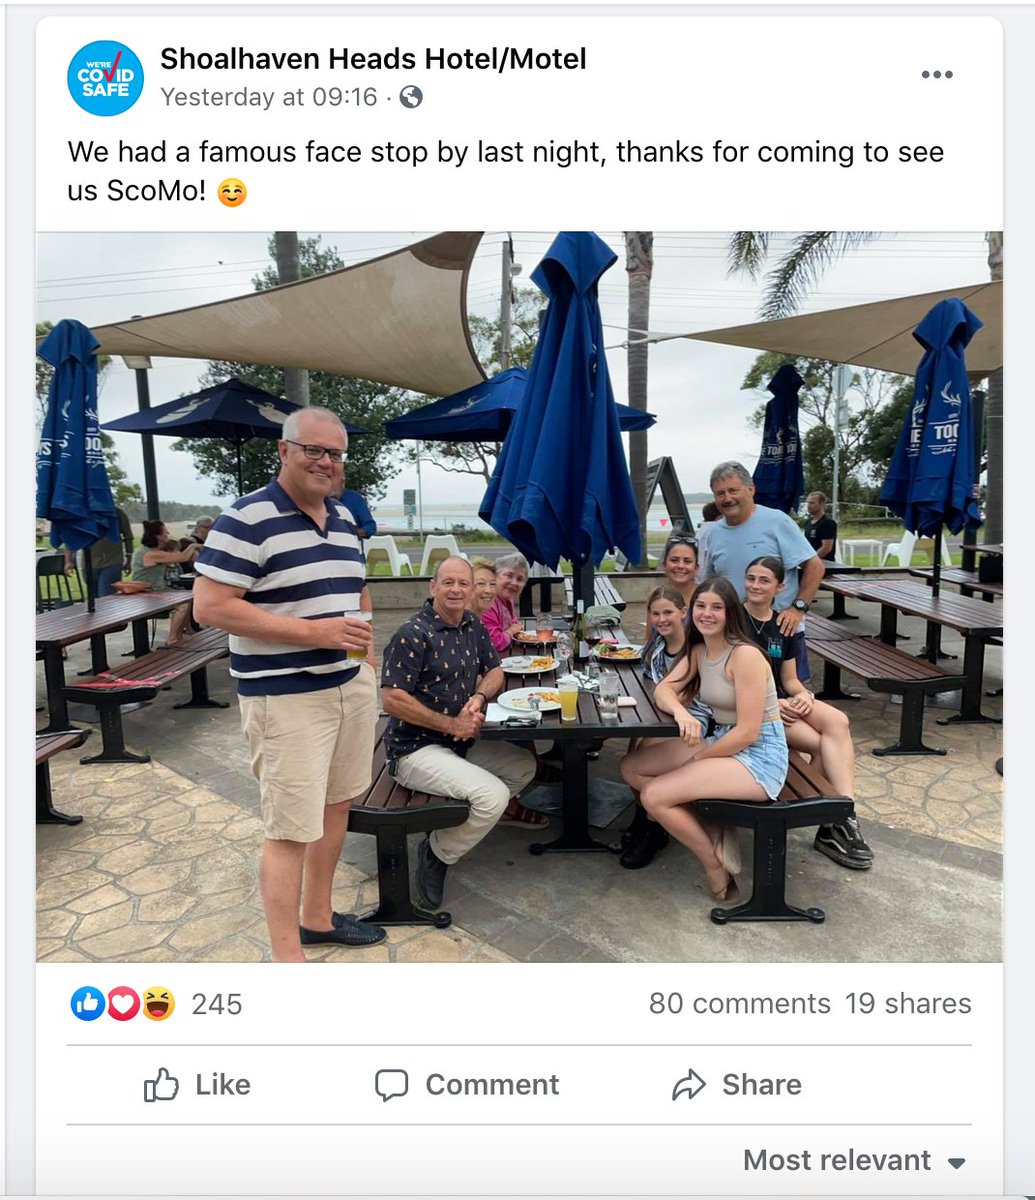 And naturally, when Scott Morrison seemed to magically find himself *checks notes* at the er, Shoalhaven Heads Hotel in a not at all contrived and staged photo opportunity, the lucky folk at the Shoalhaven Heads Hotel popped it on their facebook page.